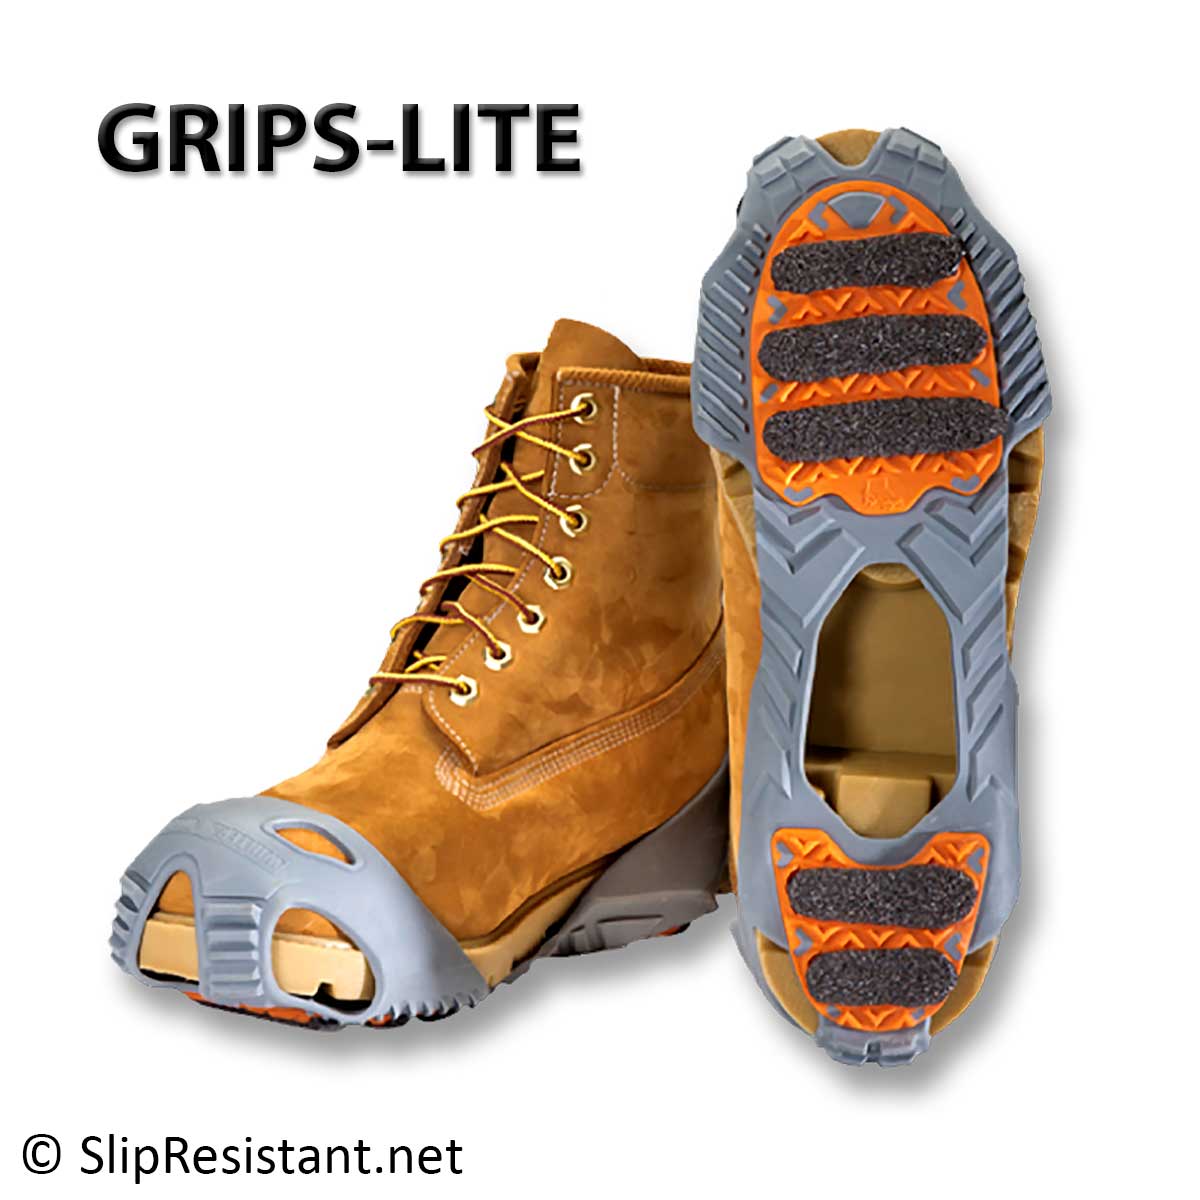 Winter Walking GRIPS-LITE Ice Cleats for Shoes and Boots